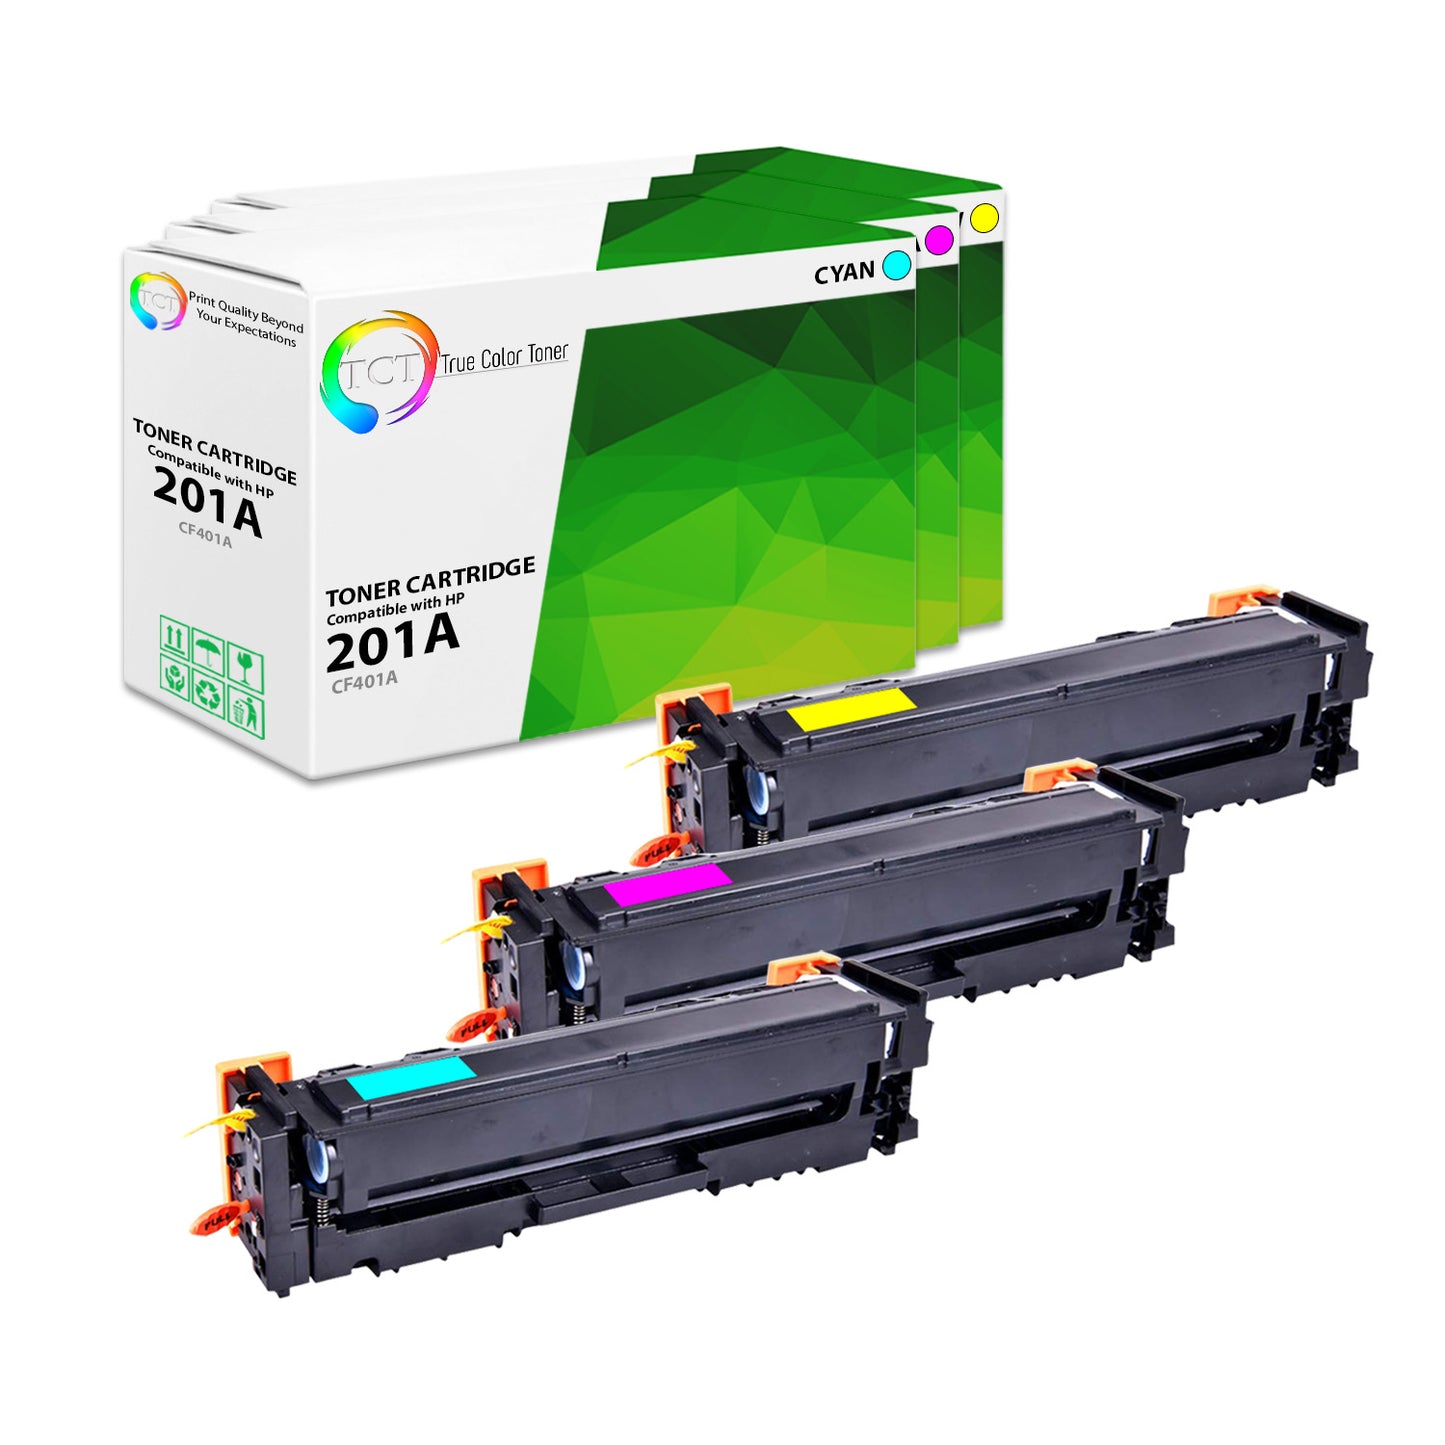 TCT Compatible Toner Cartridge Replacement for the HP 201A Series - 3 Pack (C, M, Y)